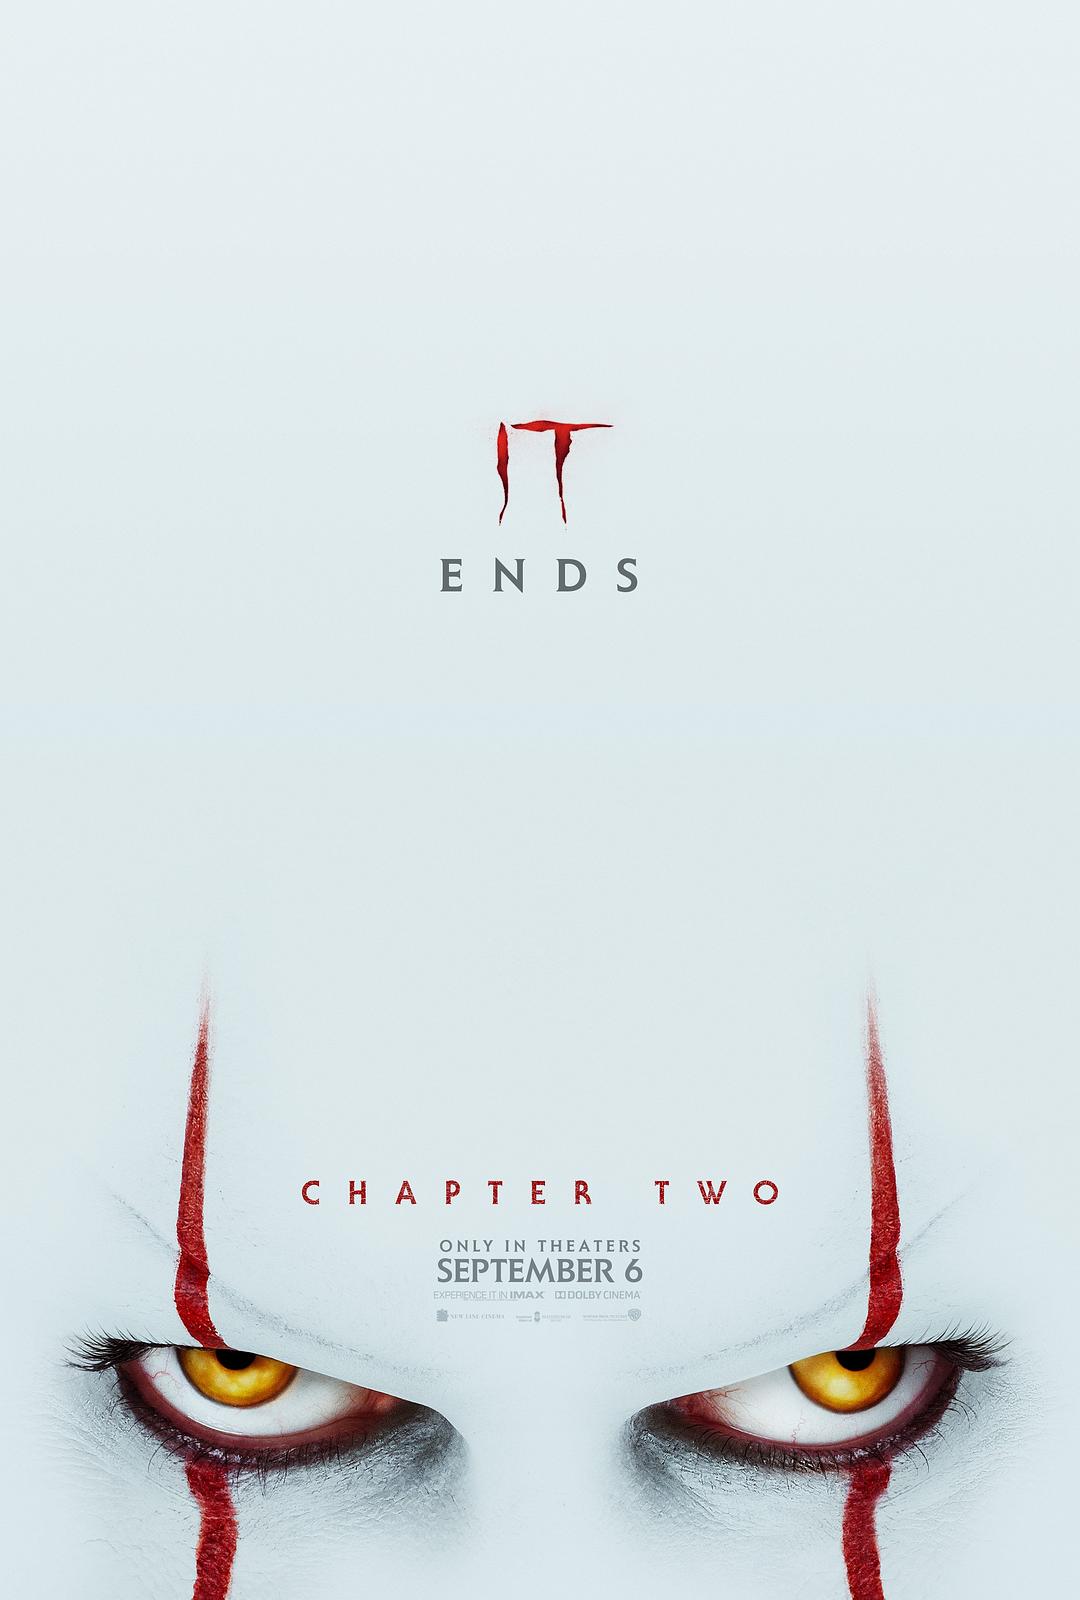 Сػ2 It.Chapter.Two.2019.1080p.BluRay.x264.TrueHD.7.1.Atmos-MT 21.40GB-1.png